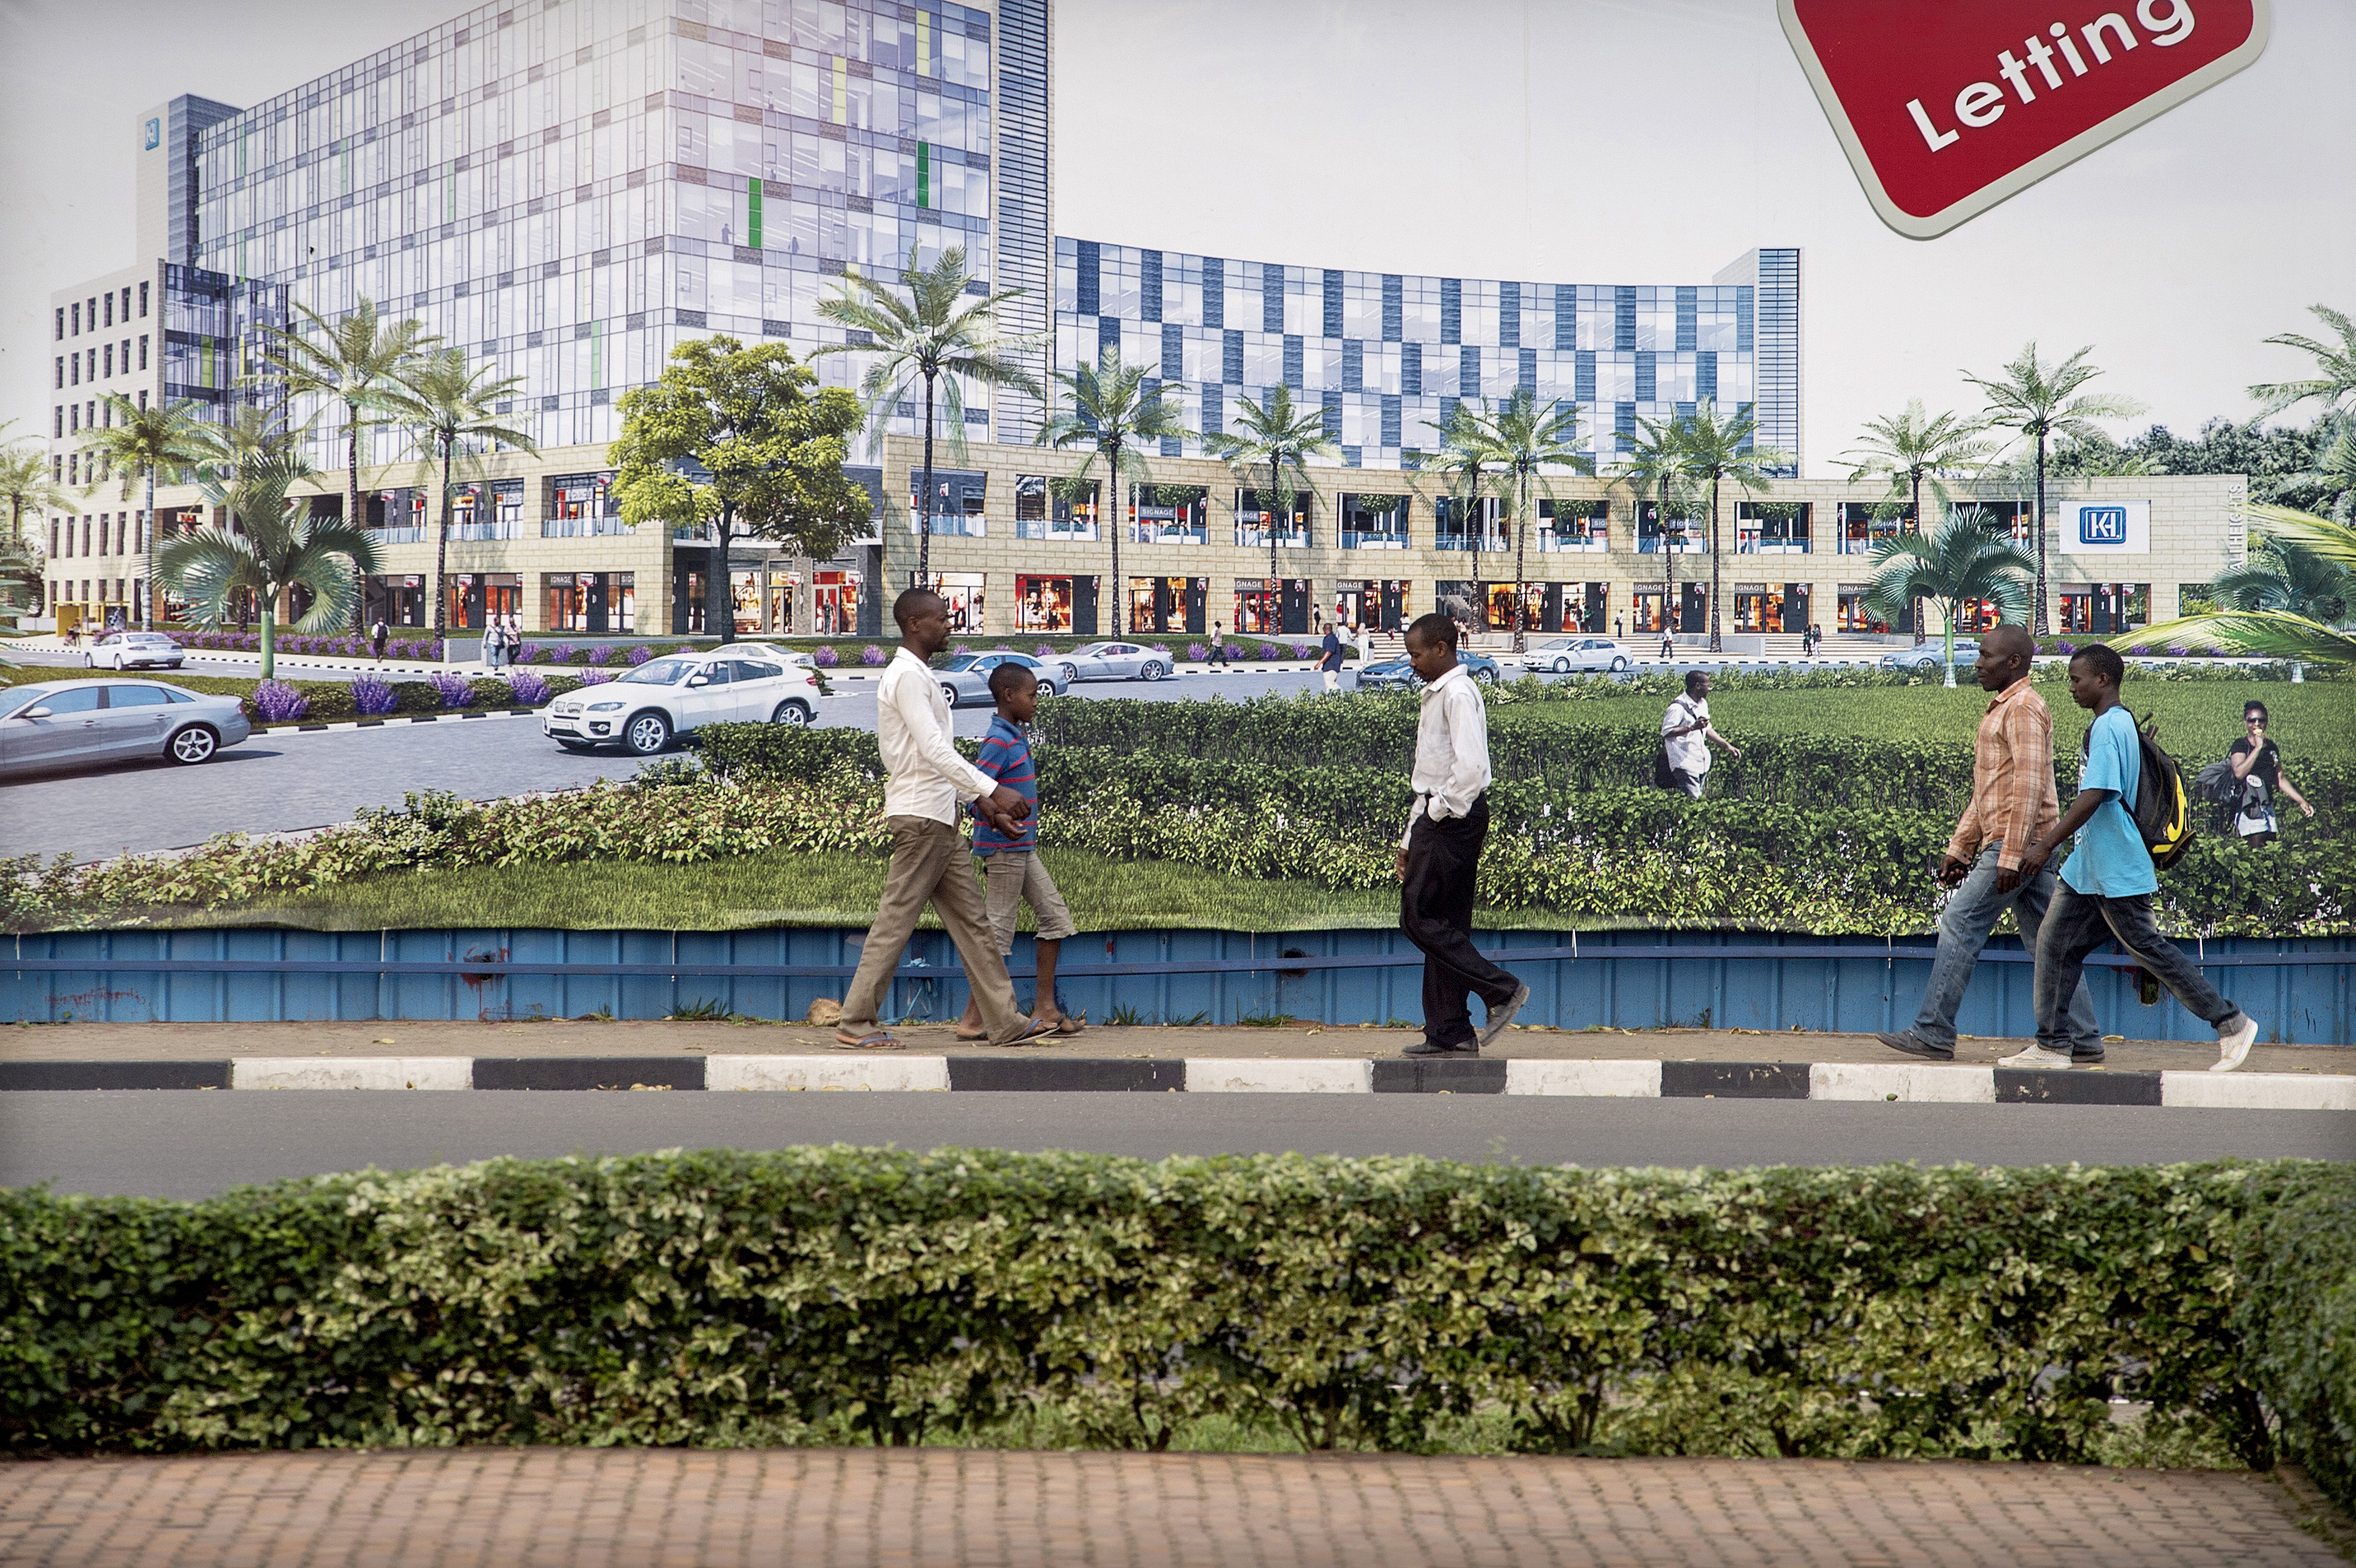 An artist impression (in the background) of a forthcoming shopping and office complex. Photo: Panos/Sven Torfinn